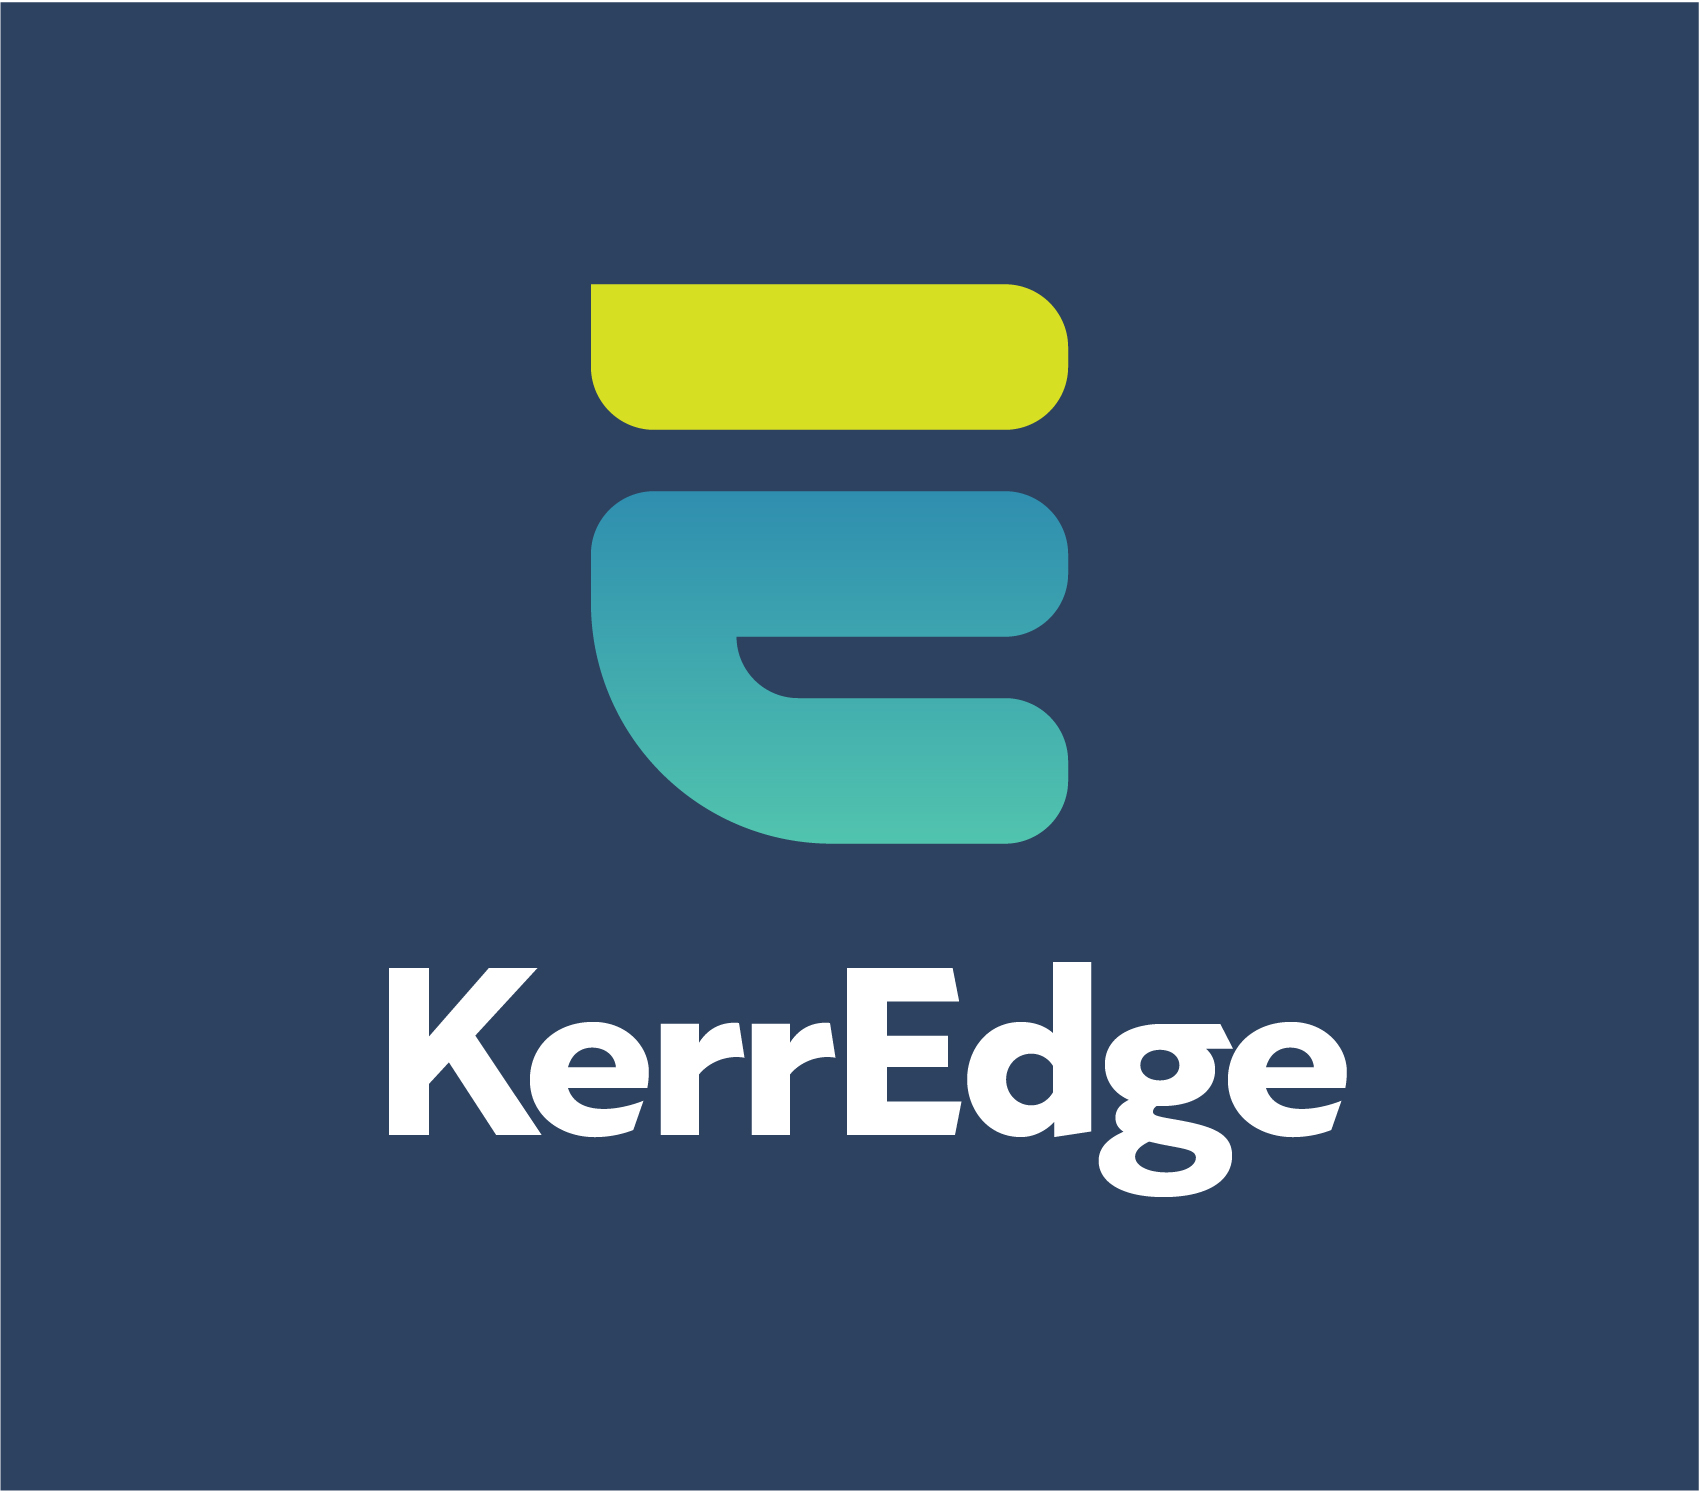 The KerrEdge Entrepreneurial Center, one-stop shop for current and prospective business owners, offers support, education and mentorship from national and regional experts.